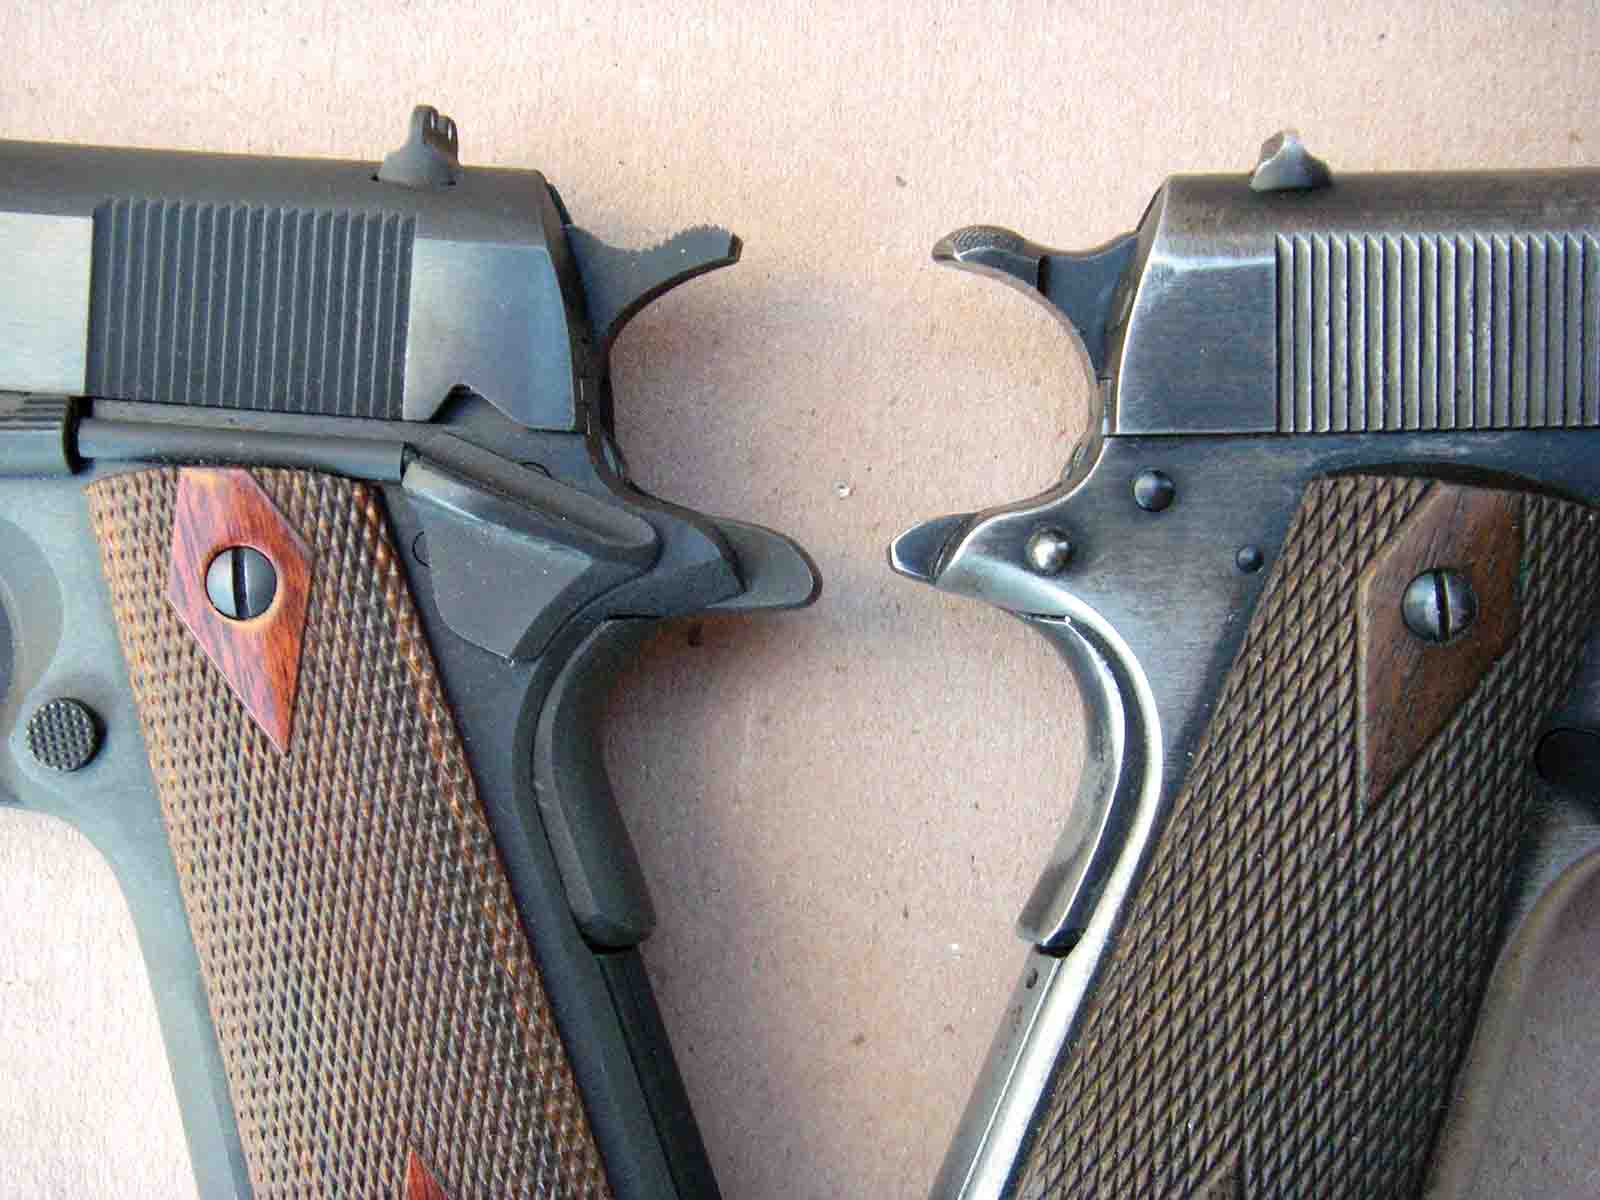 The current pistol’s grip safety (left) is not a high-position pattern, but it helps prevent pinching of the web of the hand.